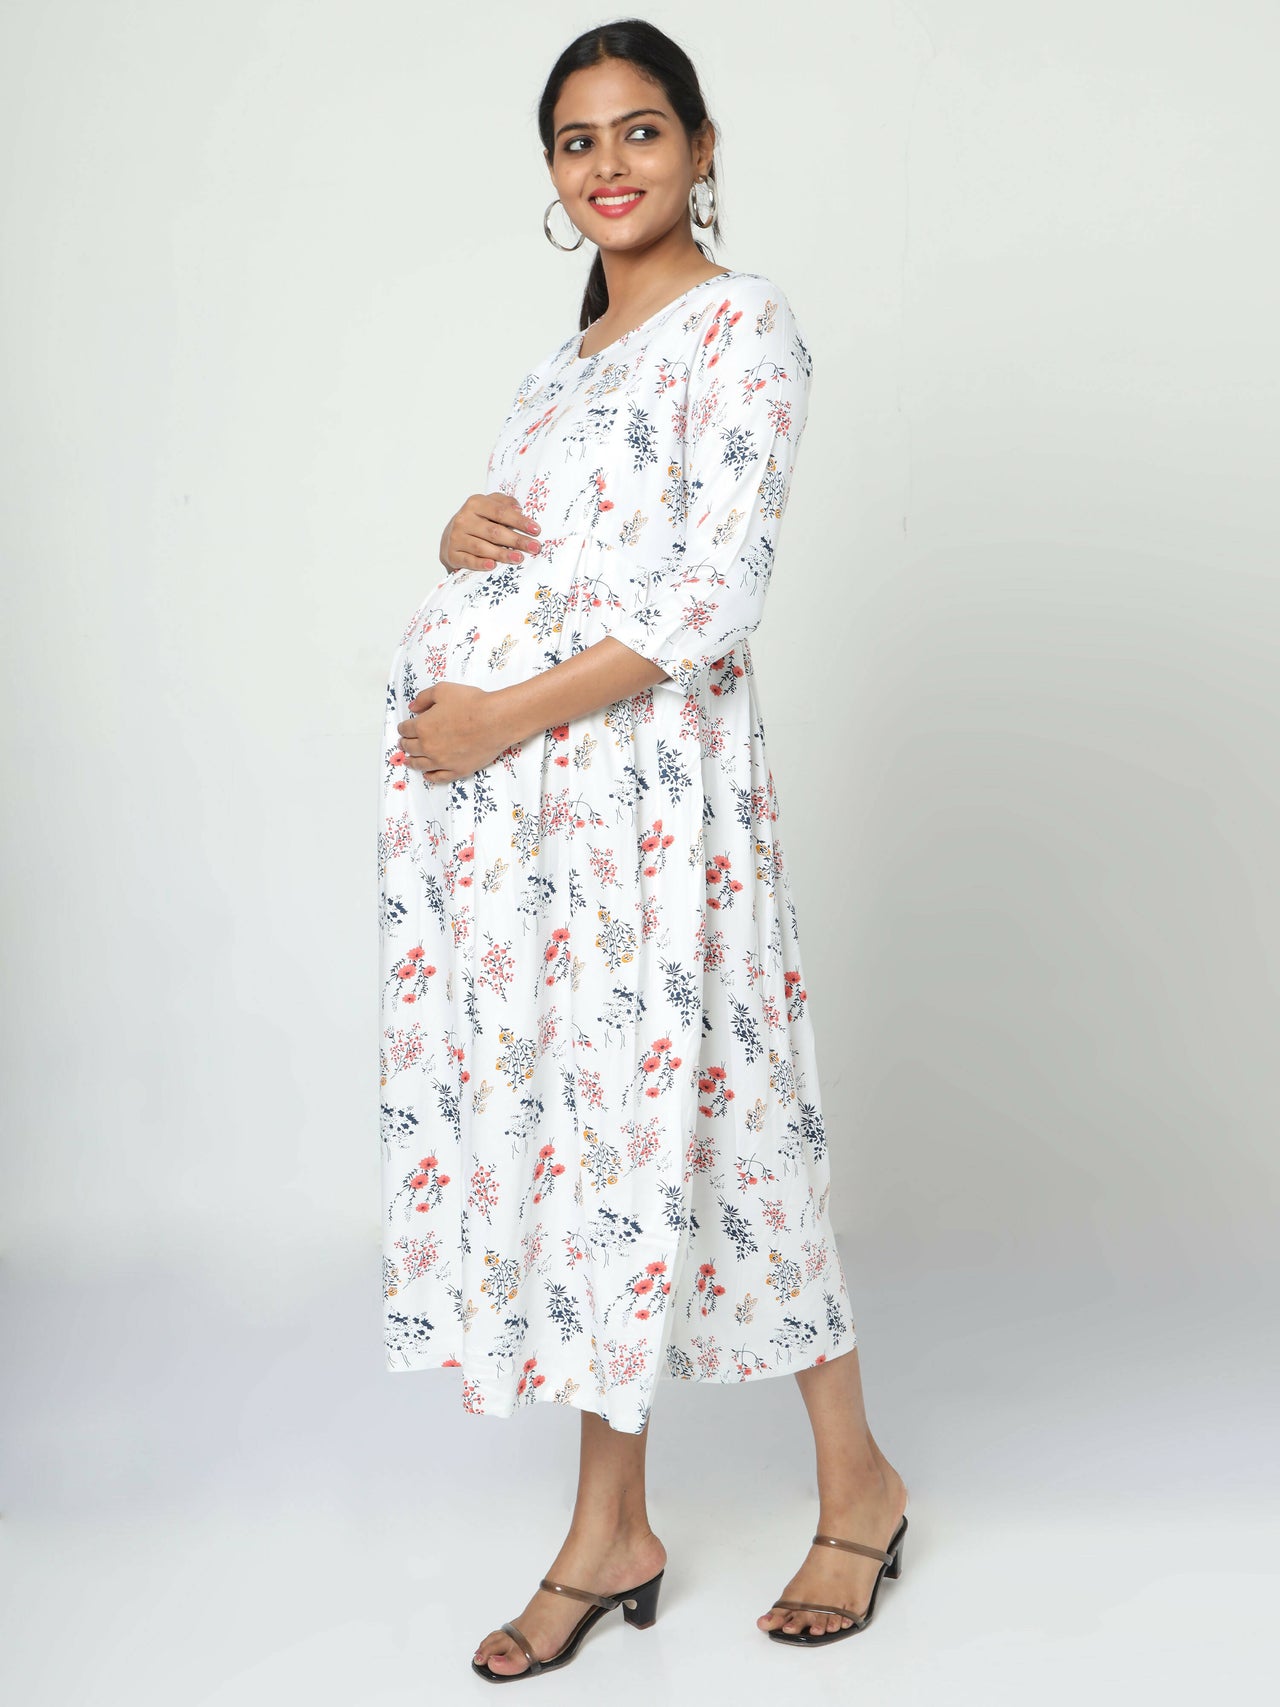 Manet Three Fourth Maternity Dress Floral Print With Concealed Zipper Nursing Access - White - Distacart